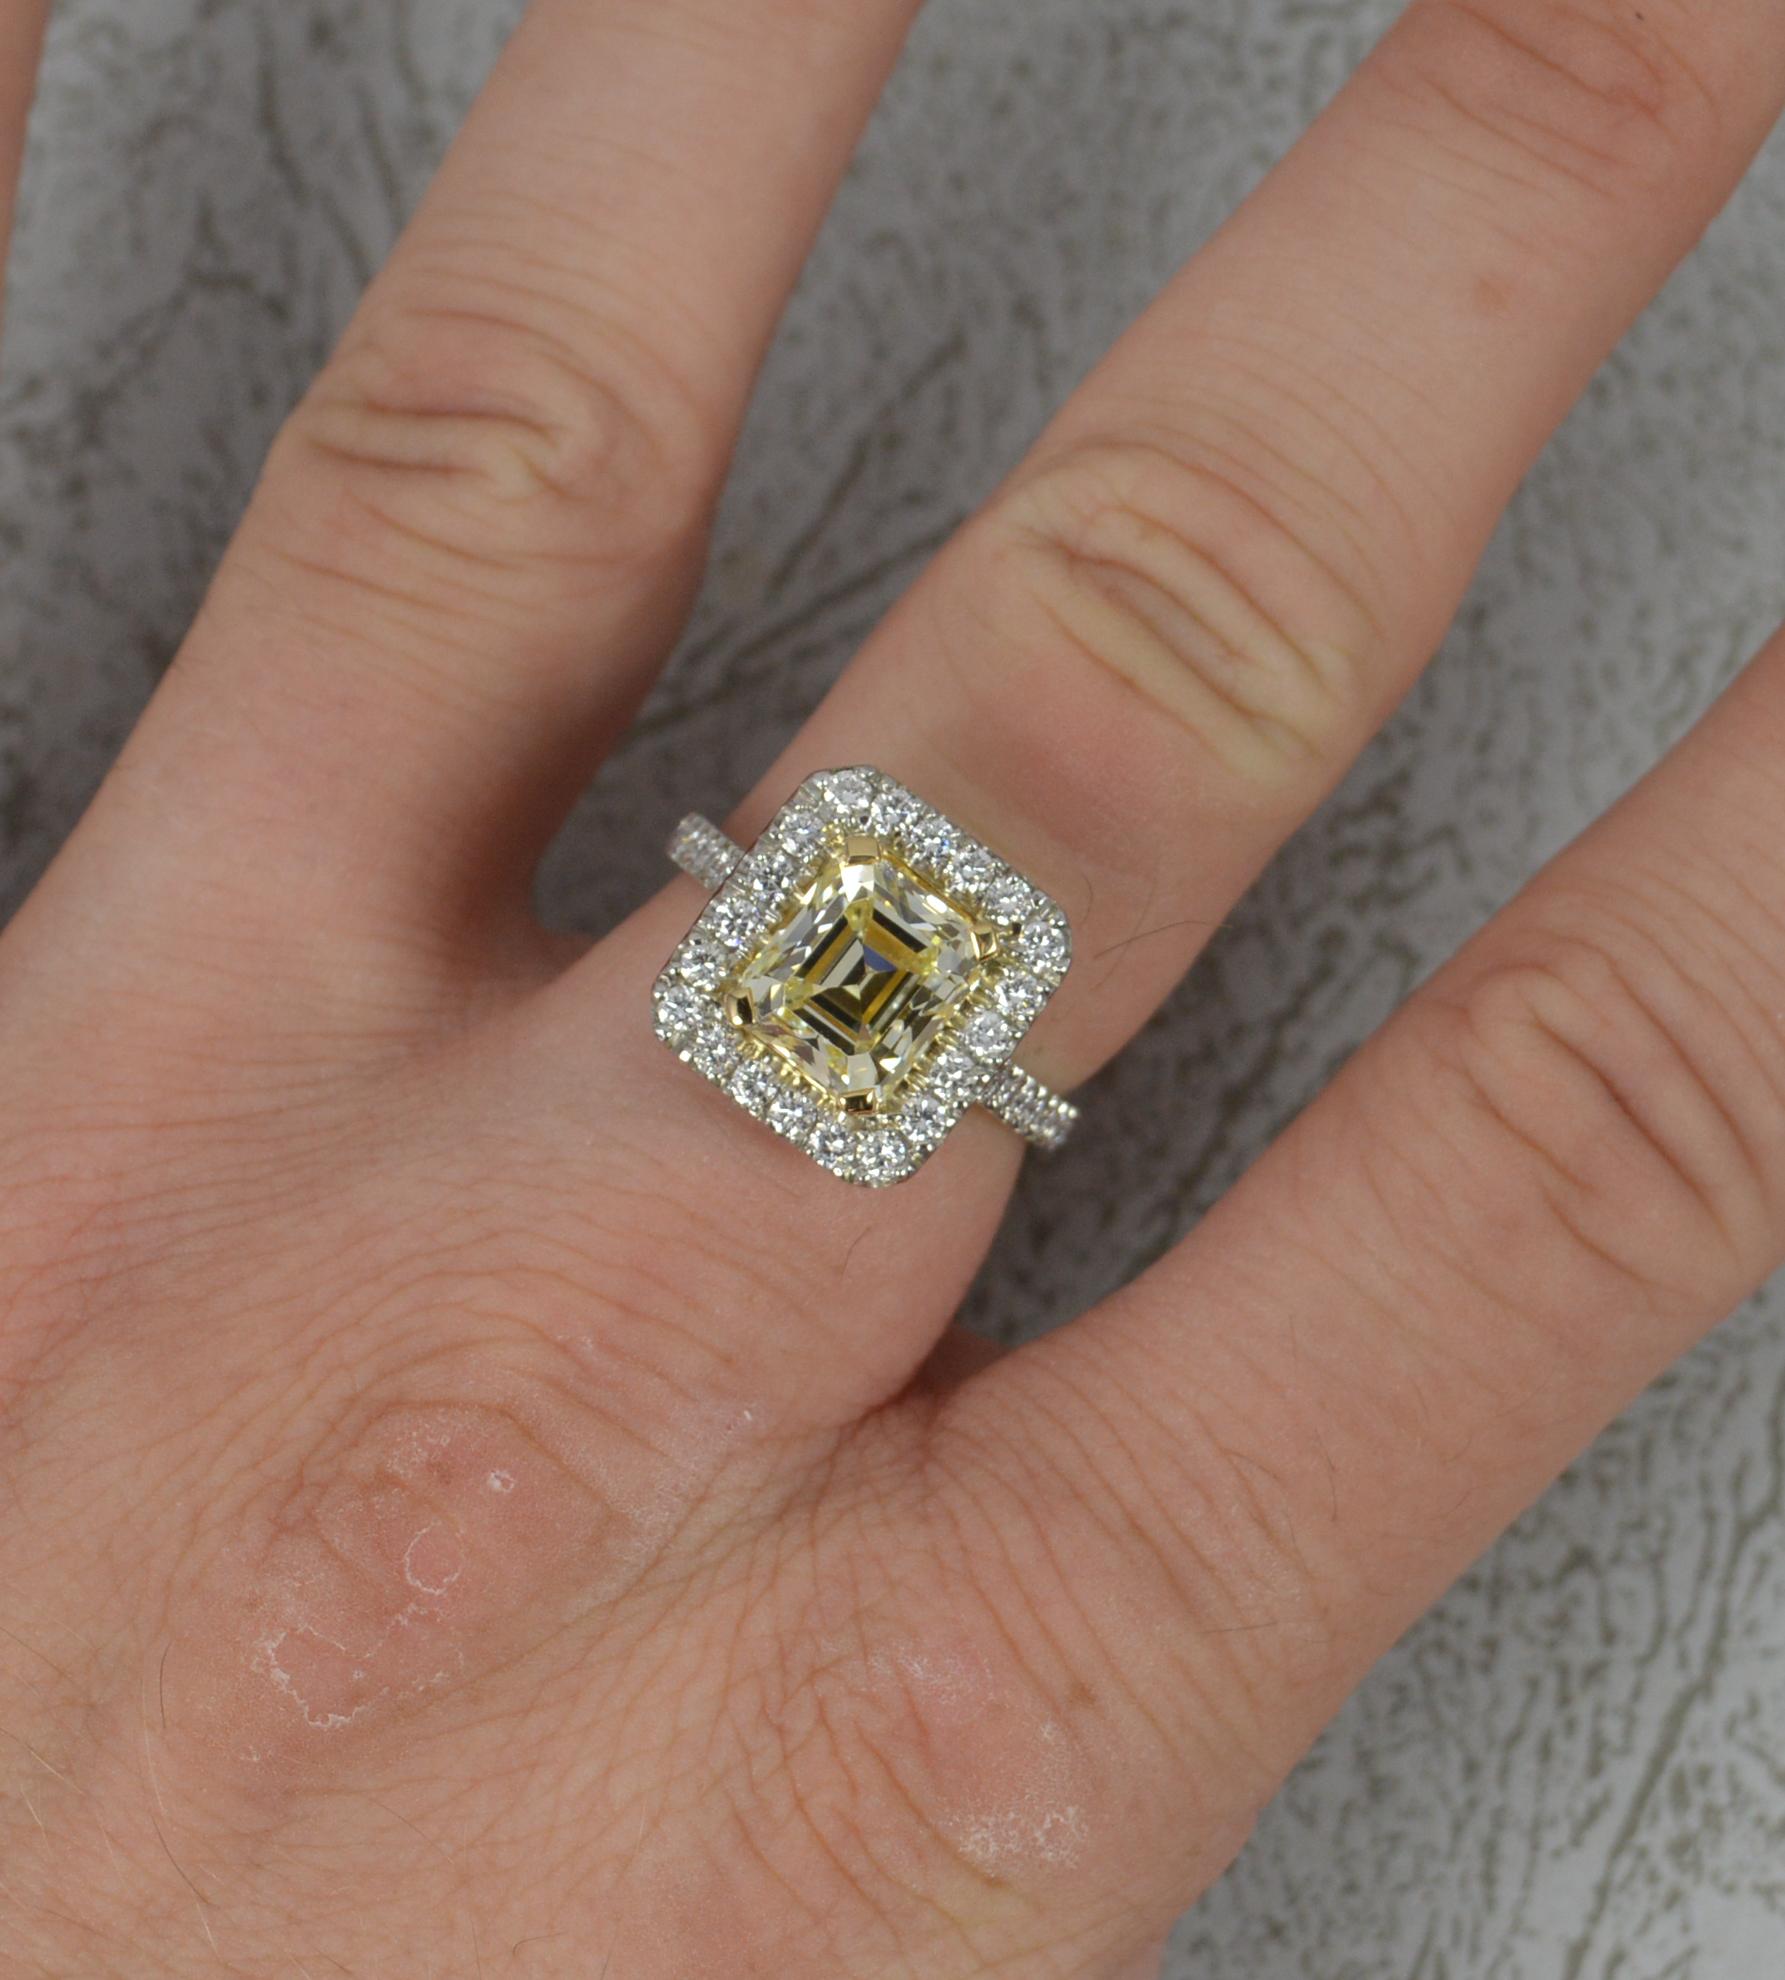 A stunning quality Yellow and White Diamond engagement ring.
A contemporary example of art deco design.
Solid 950 grade platinum shank and 18ct yellow gold closed setting for the central diamond.
Designed with a 7.4mm x 9.0mm emerald cut natural